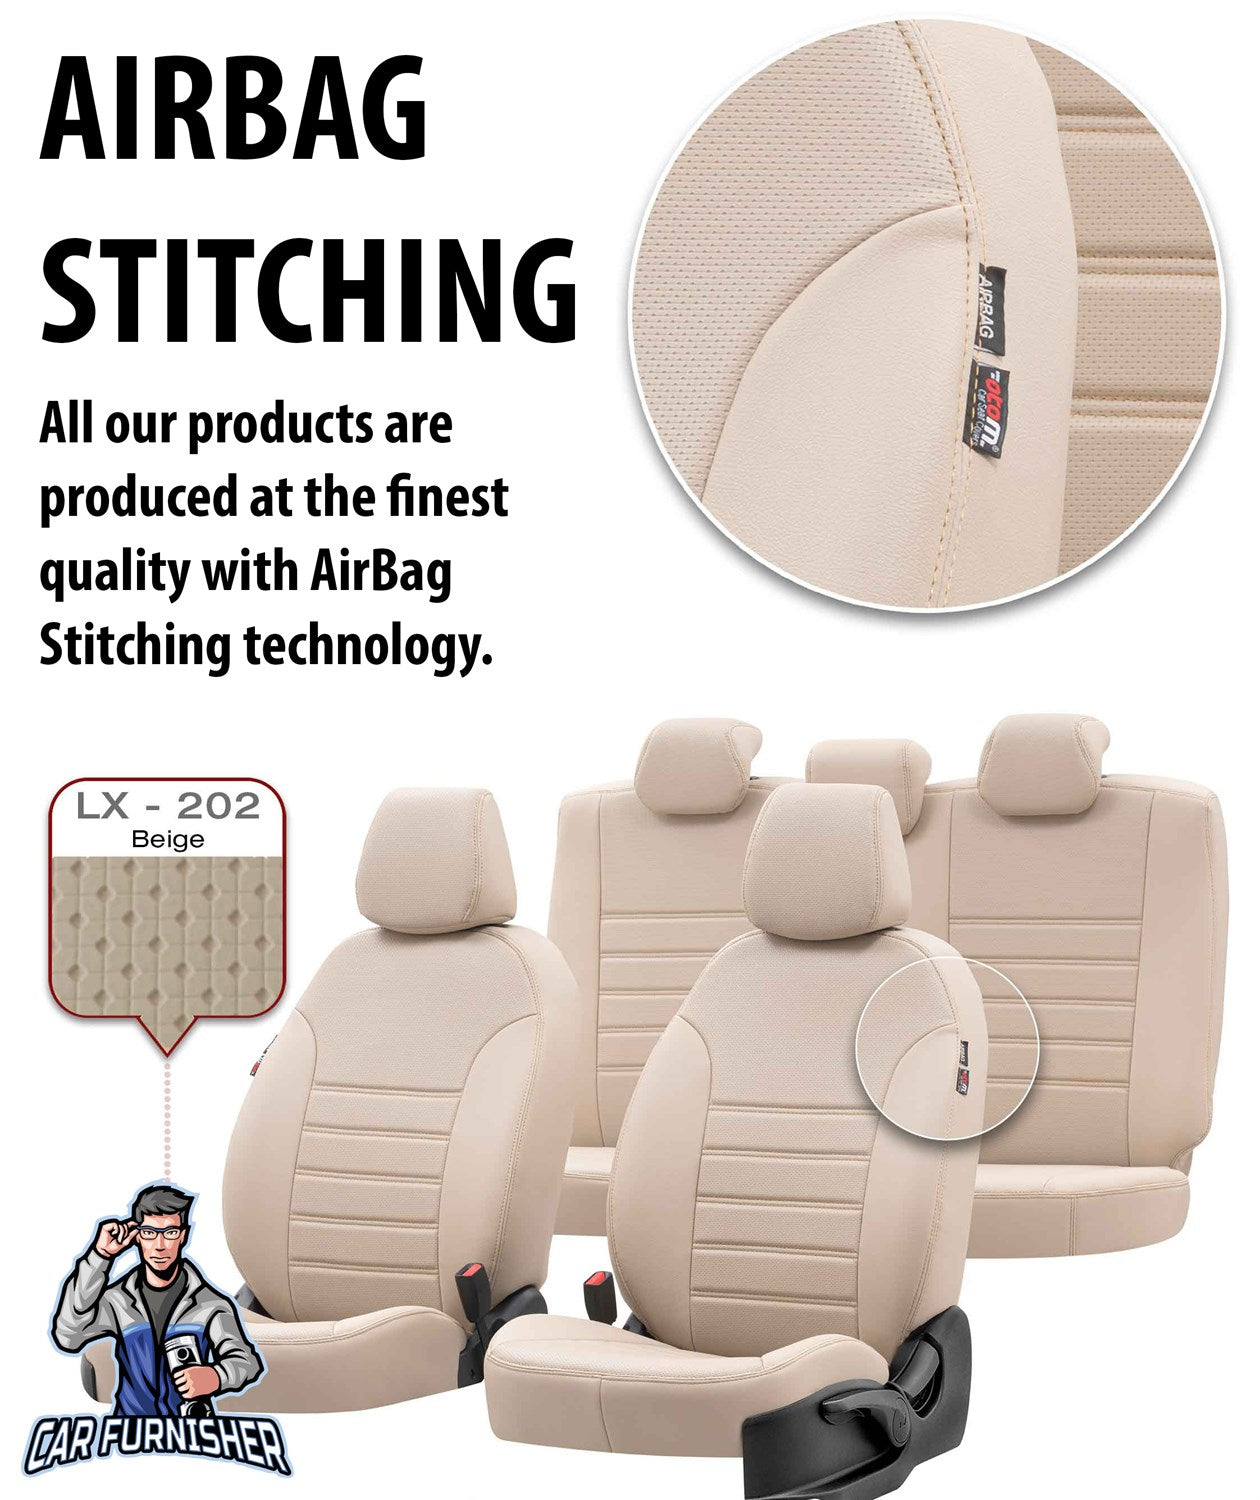 Mercedes Sprinter Seat Covers New York Leather Design Smoked Black Leather